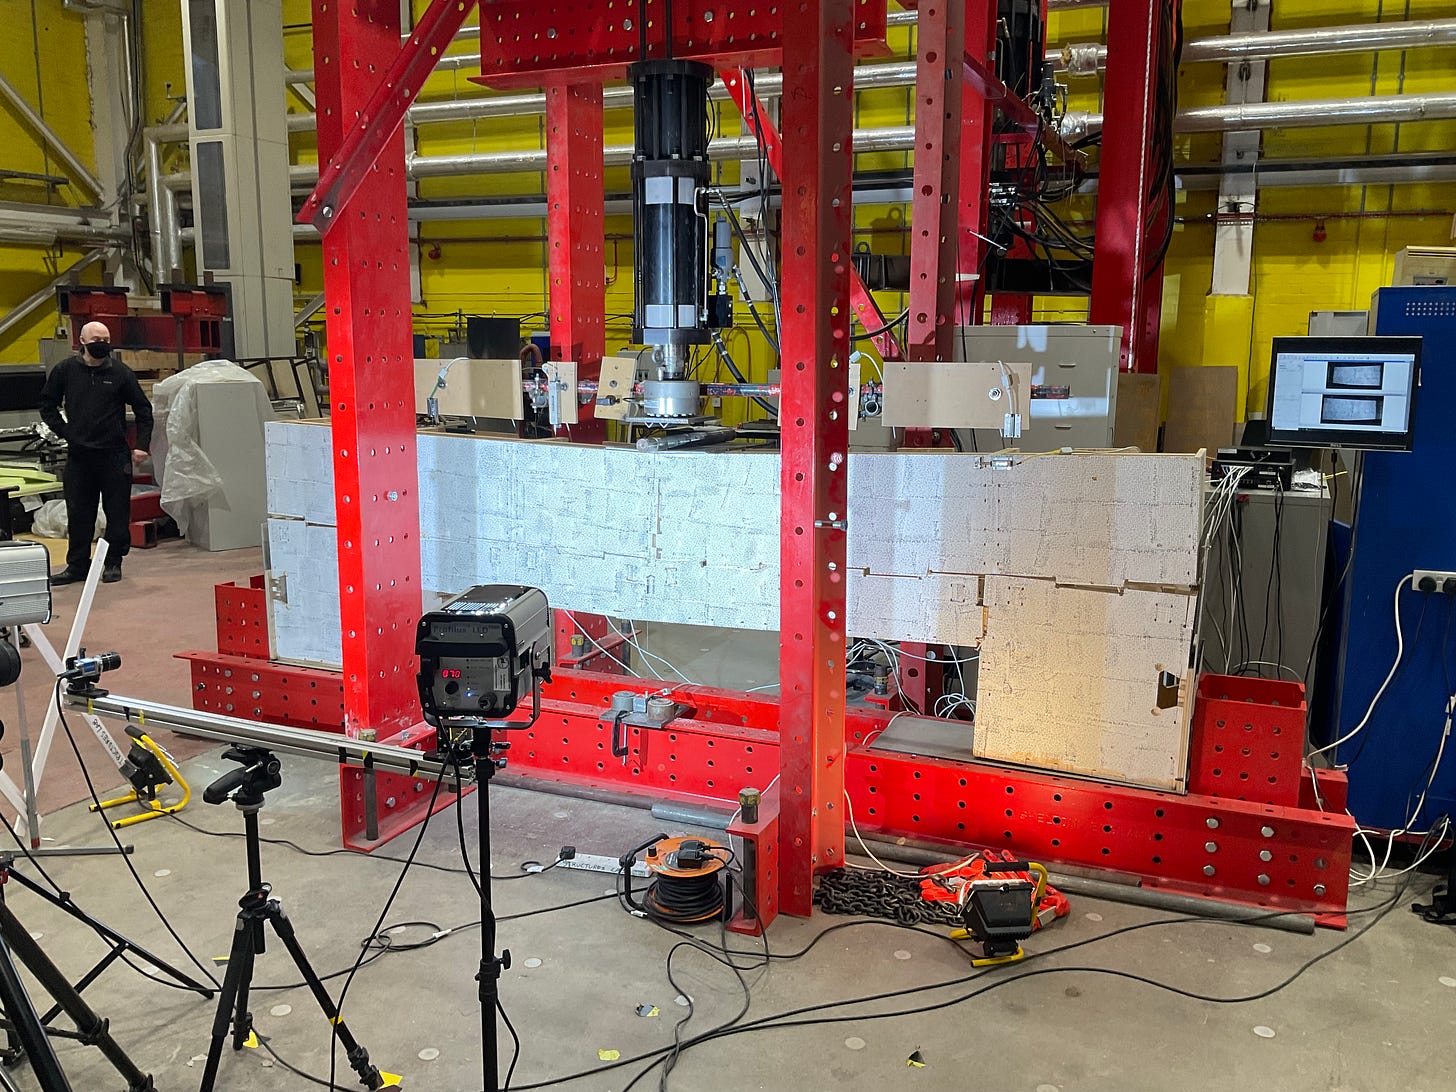 Image of lintel block being breaking after testing in the lab.